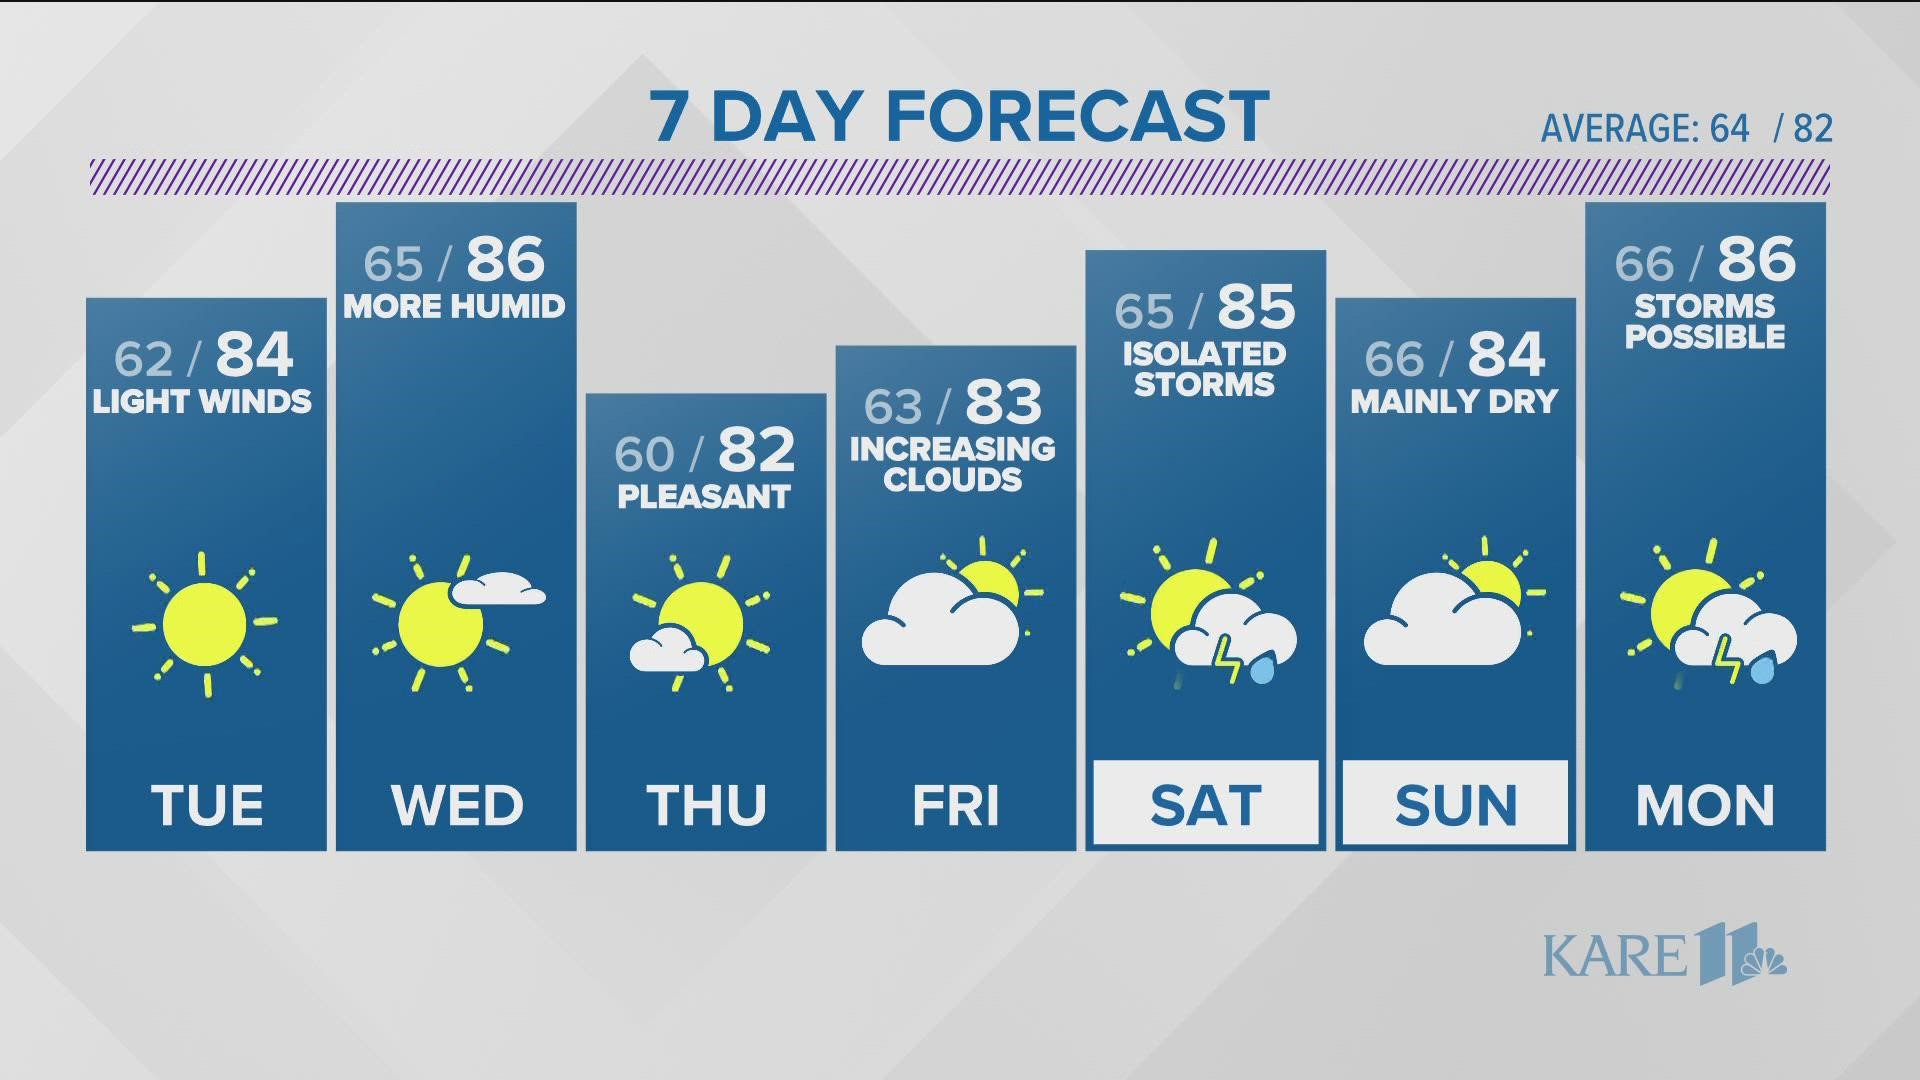 A gradual warm-up this week, with a slight chance of isolated storms Friday and Saturday.